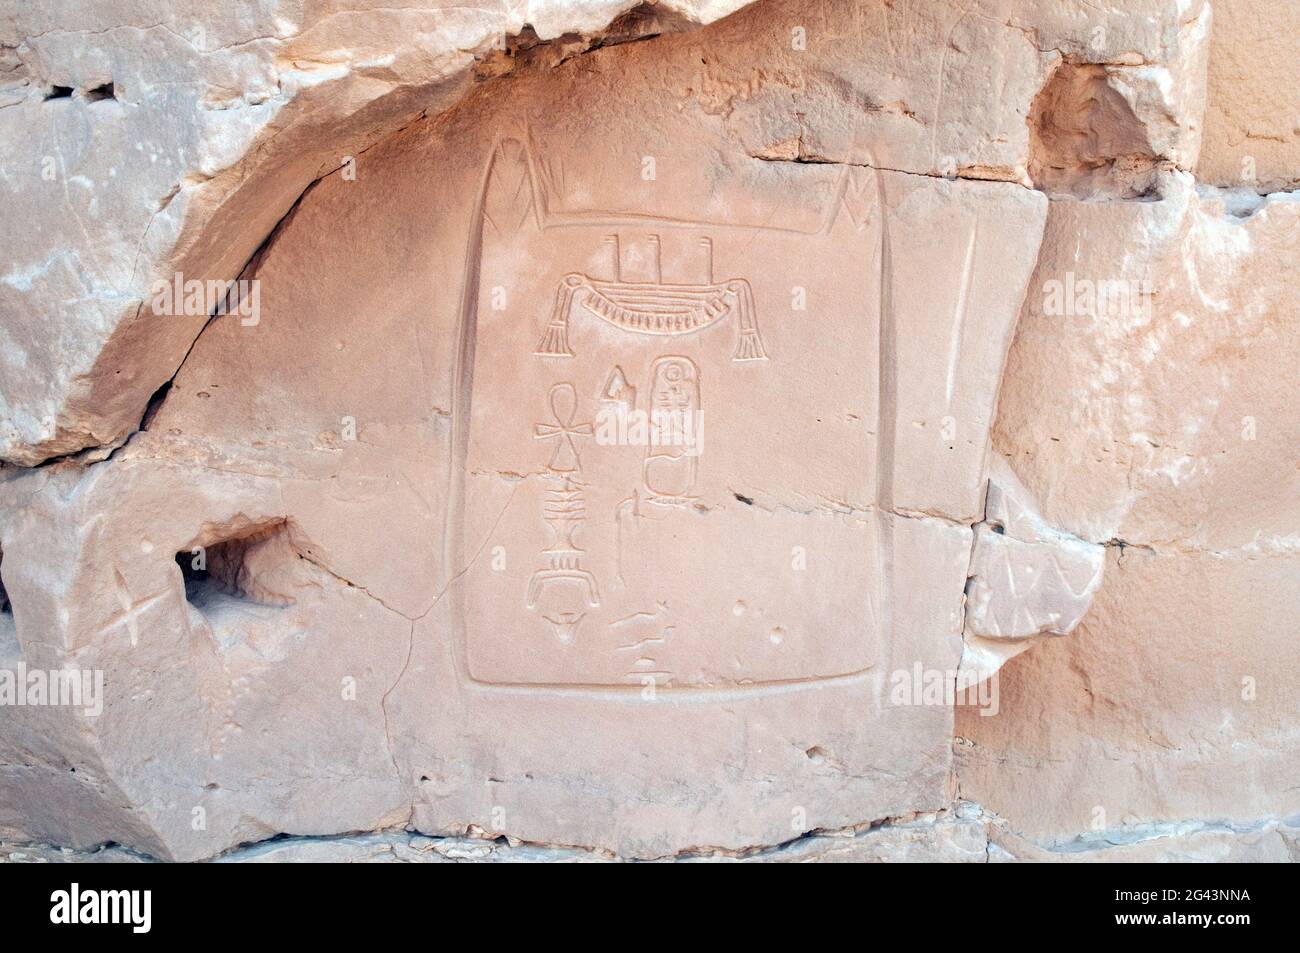 Hieroglyphic cartouche inscription and petroglyph dating to 2600 BC at the Water Mountain of Djedefre, in the Western Desert Sahara region of Egypt. Stock Photo